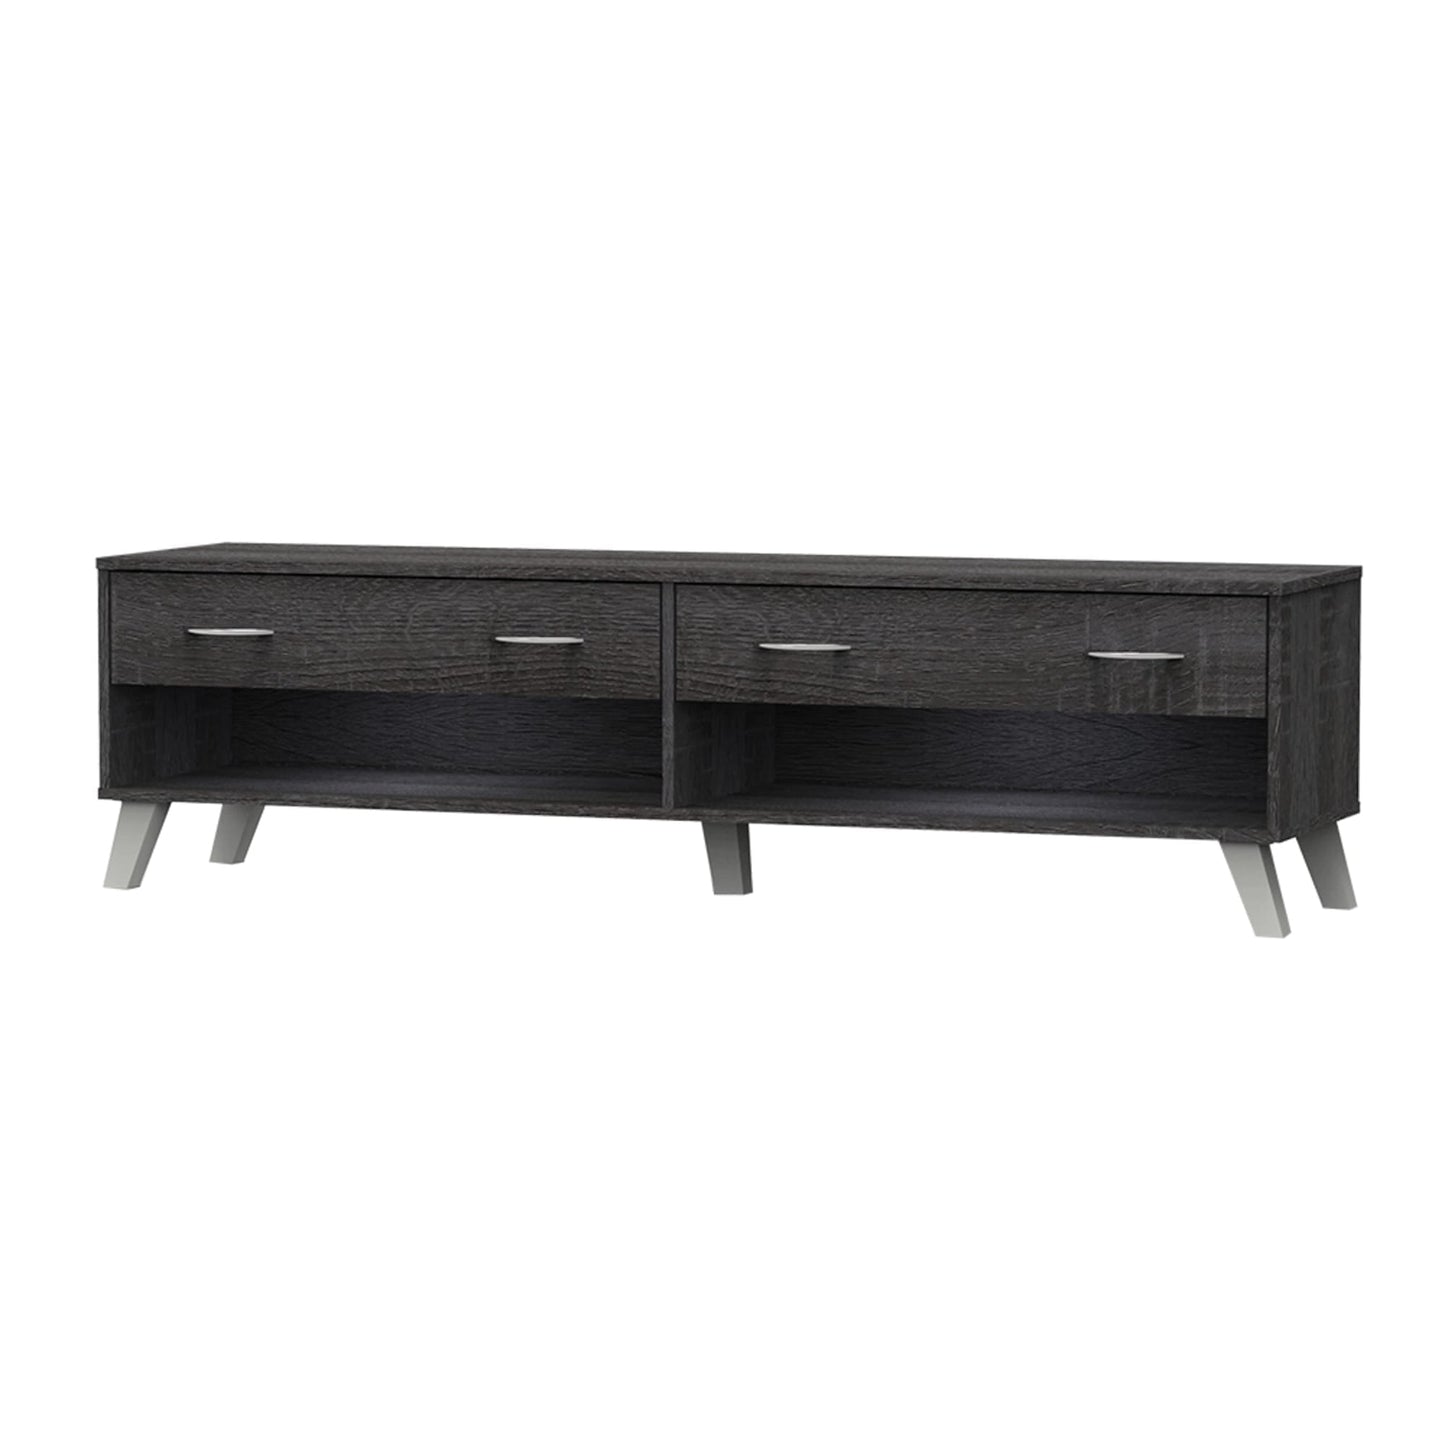 15" x 62" TV Stand With Drawers, Charred Oak